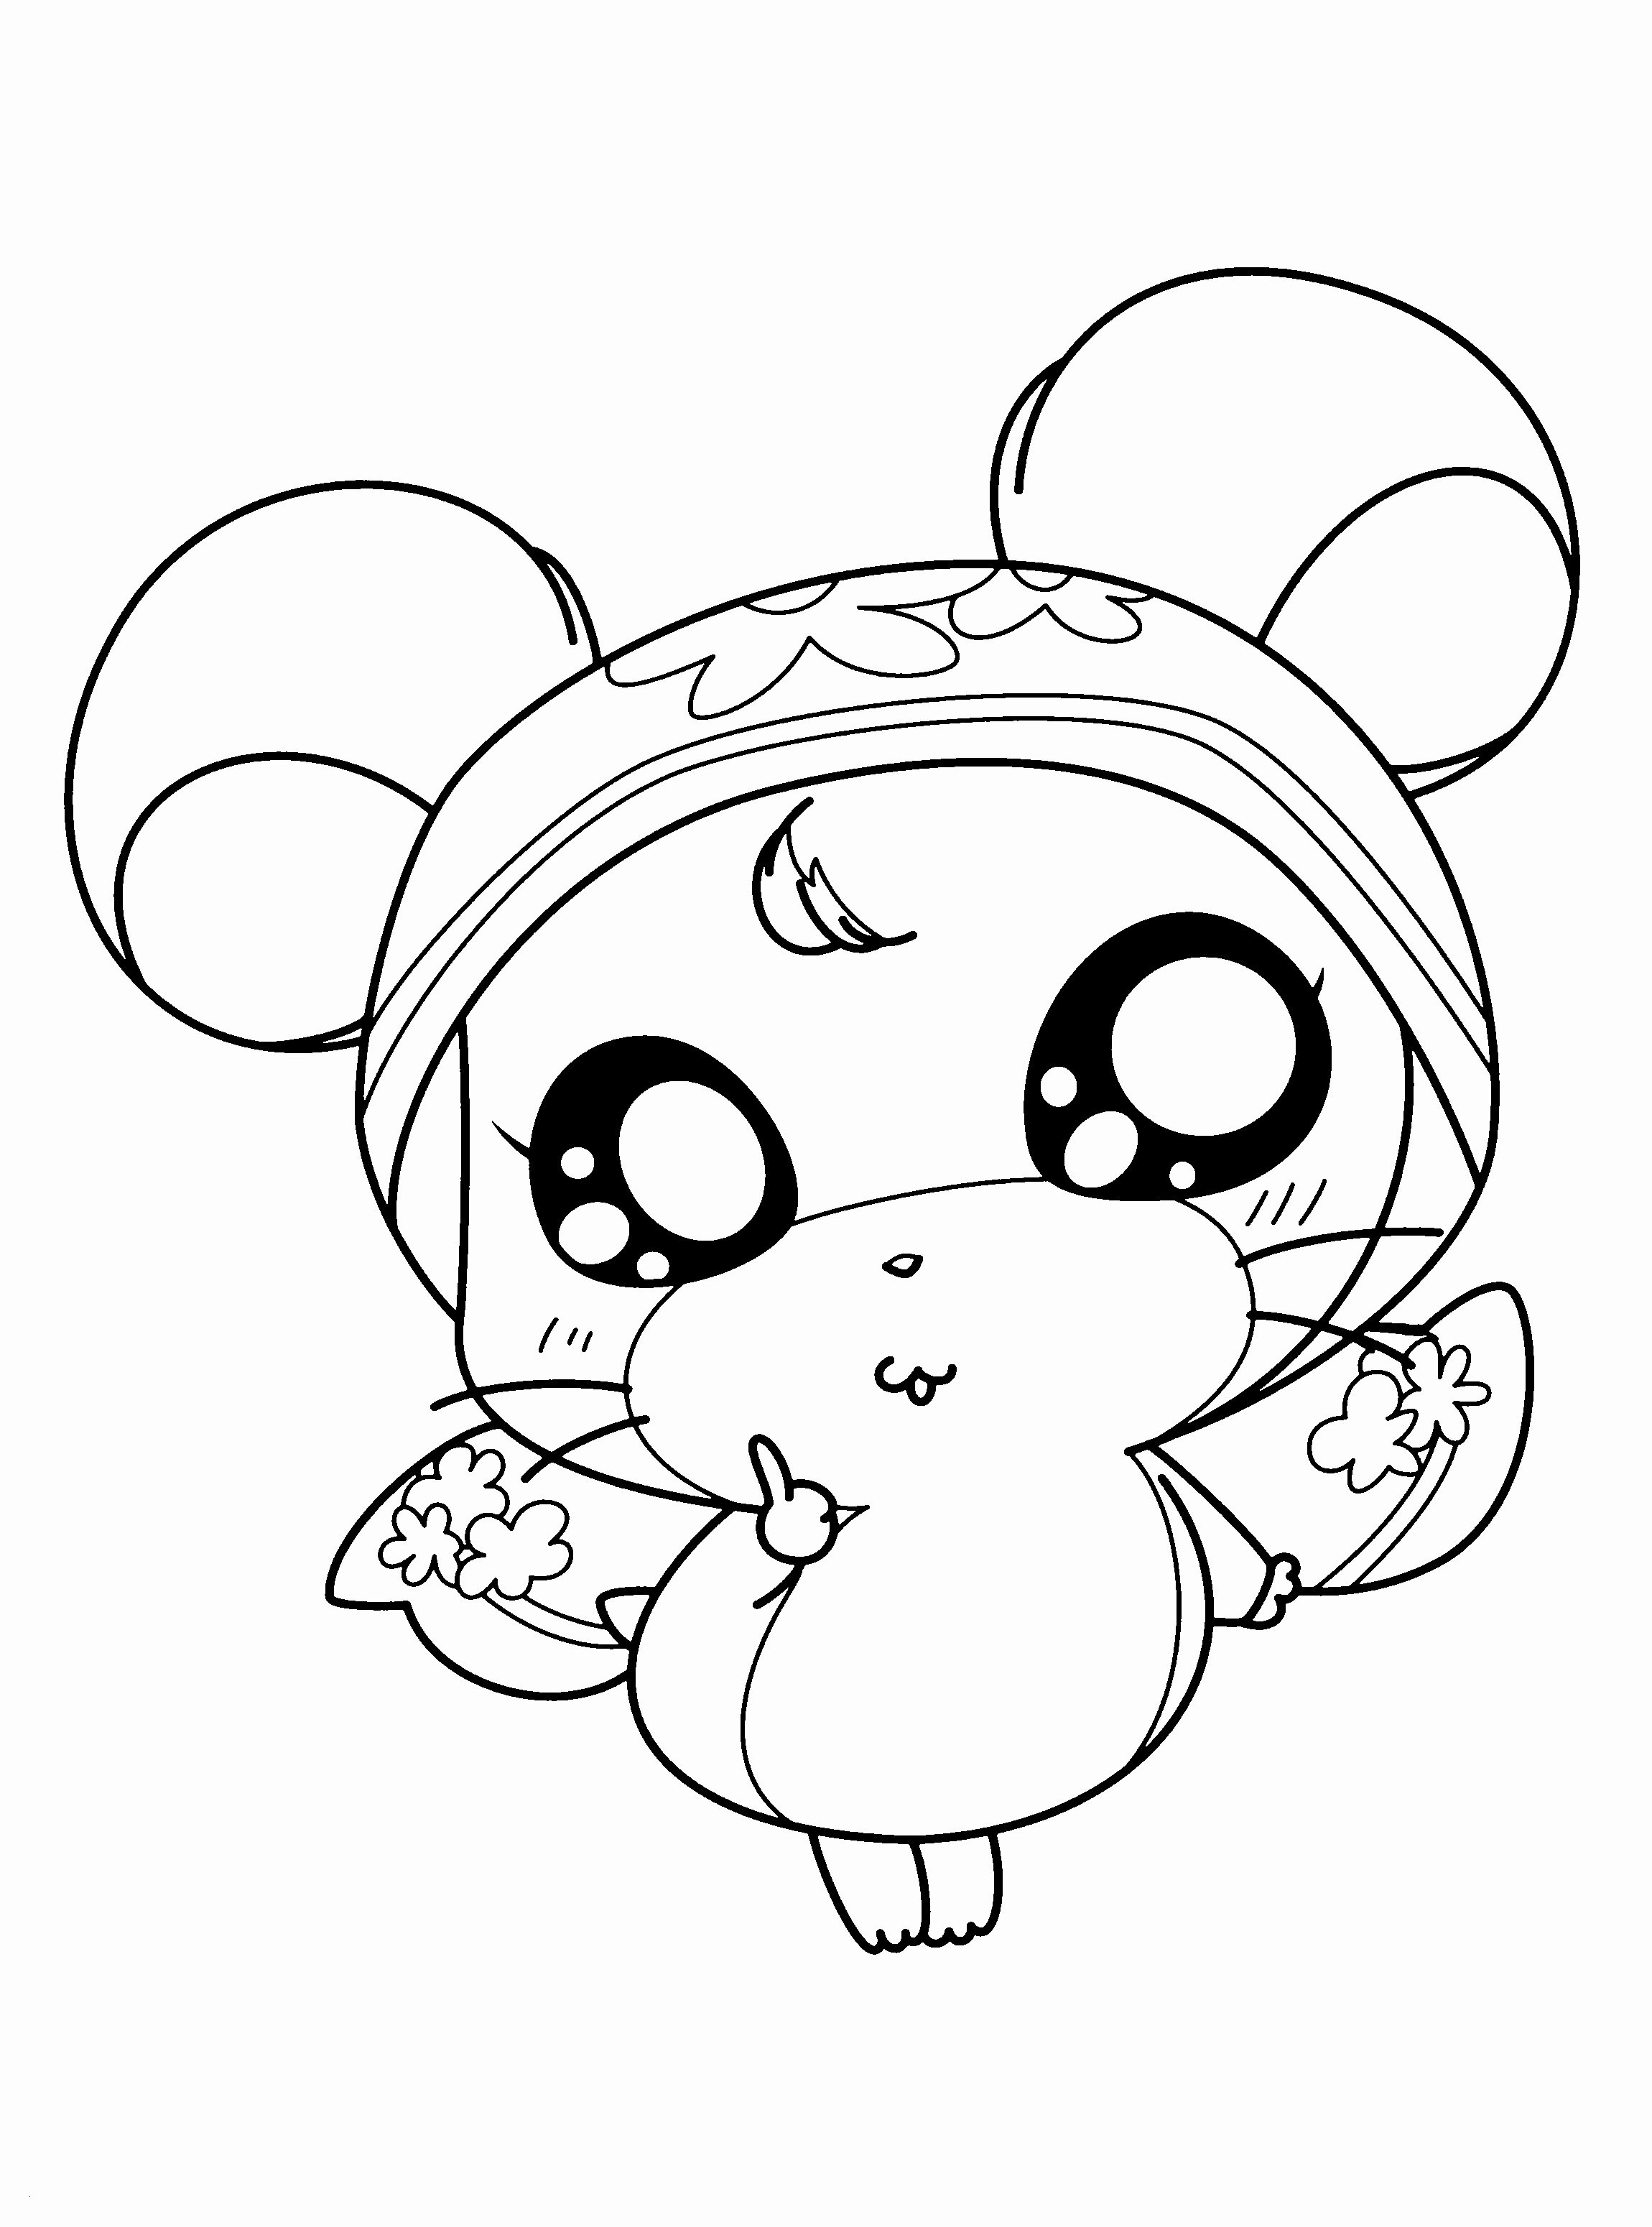 Coloring Pages Of Cute Baby Animals Wallpaper